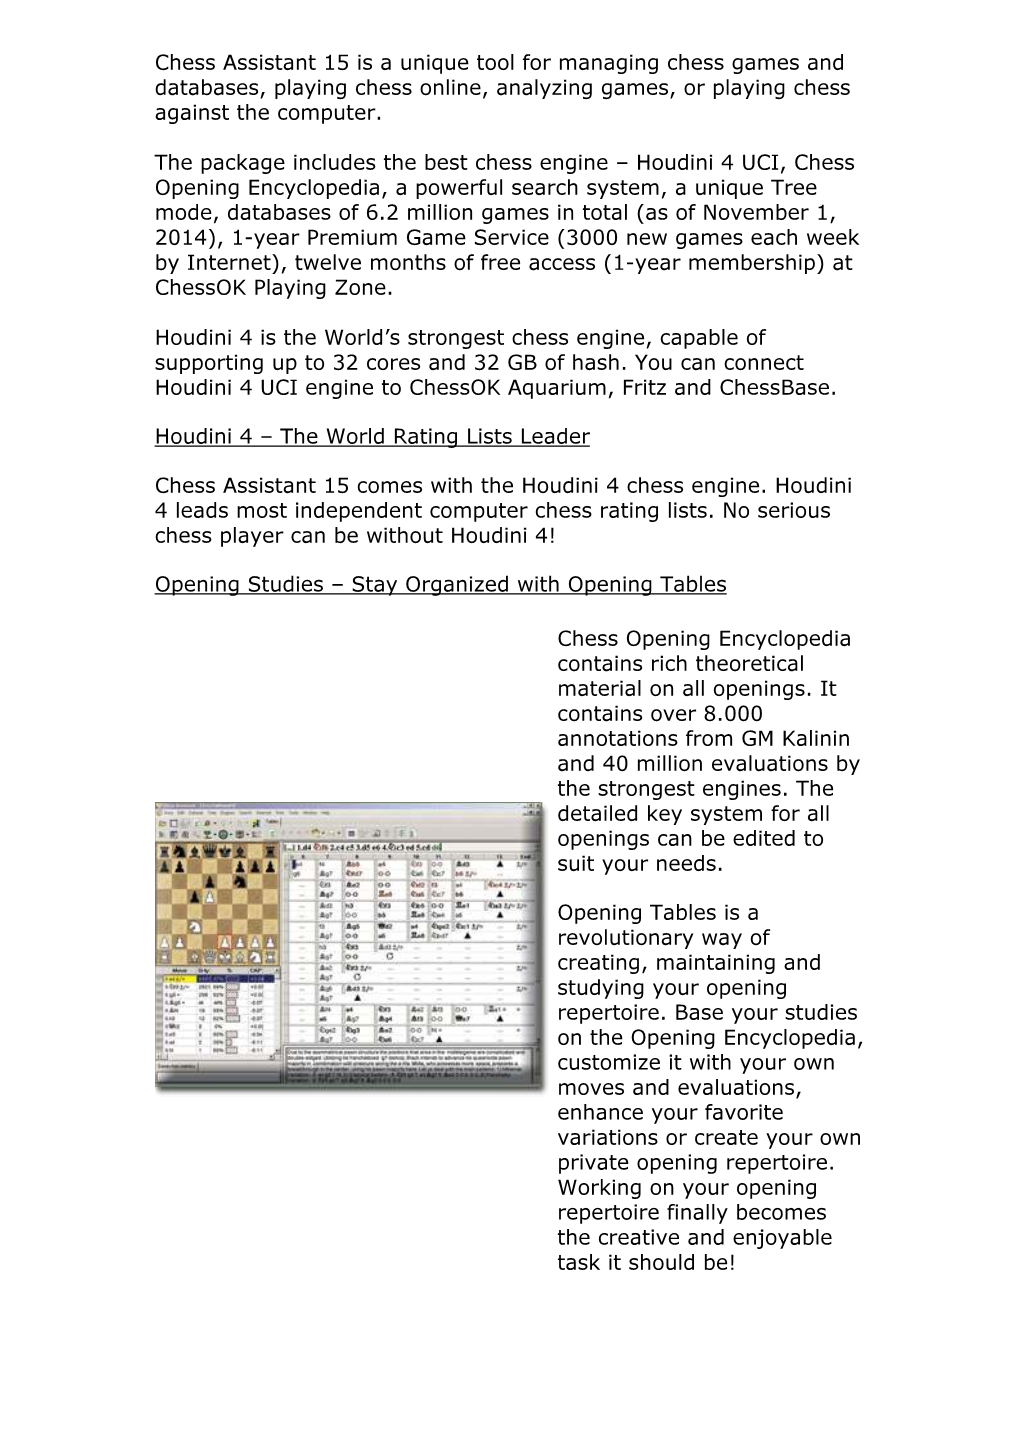 Chess Assistant 15 Is a Unique Tool for Managing Chess Games and Databases, Playing Chess Online, Analyzing Games, Or Playing Chess Against the Computer